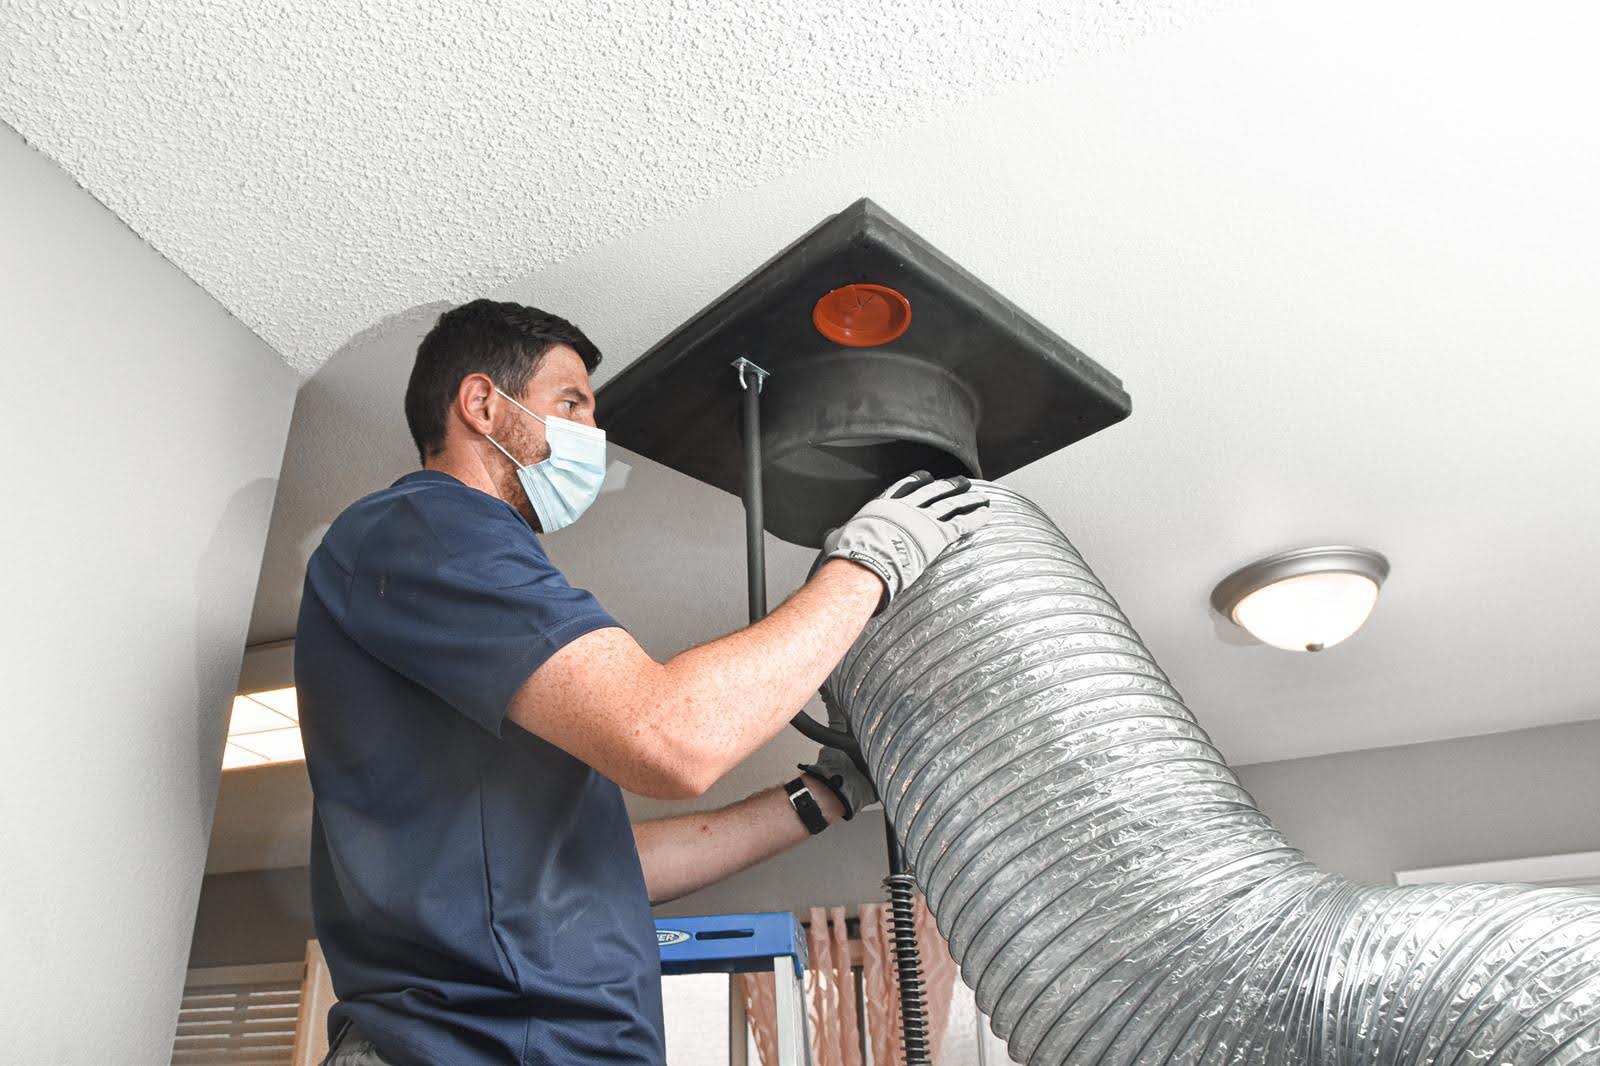 Where to Find Reliable AC Duct Cleaning Services in Summerlin